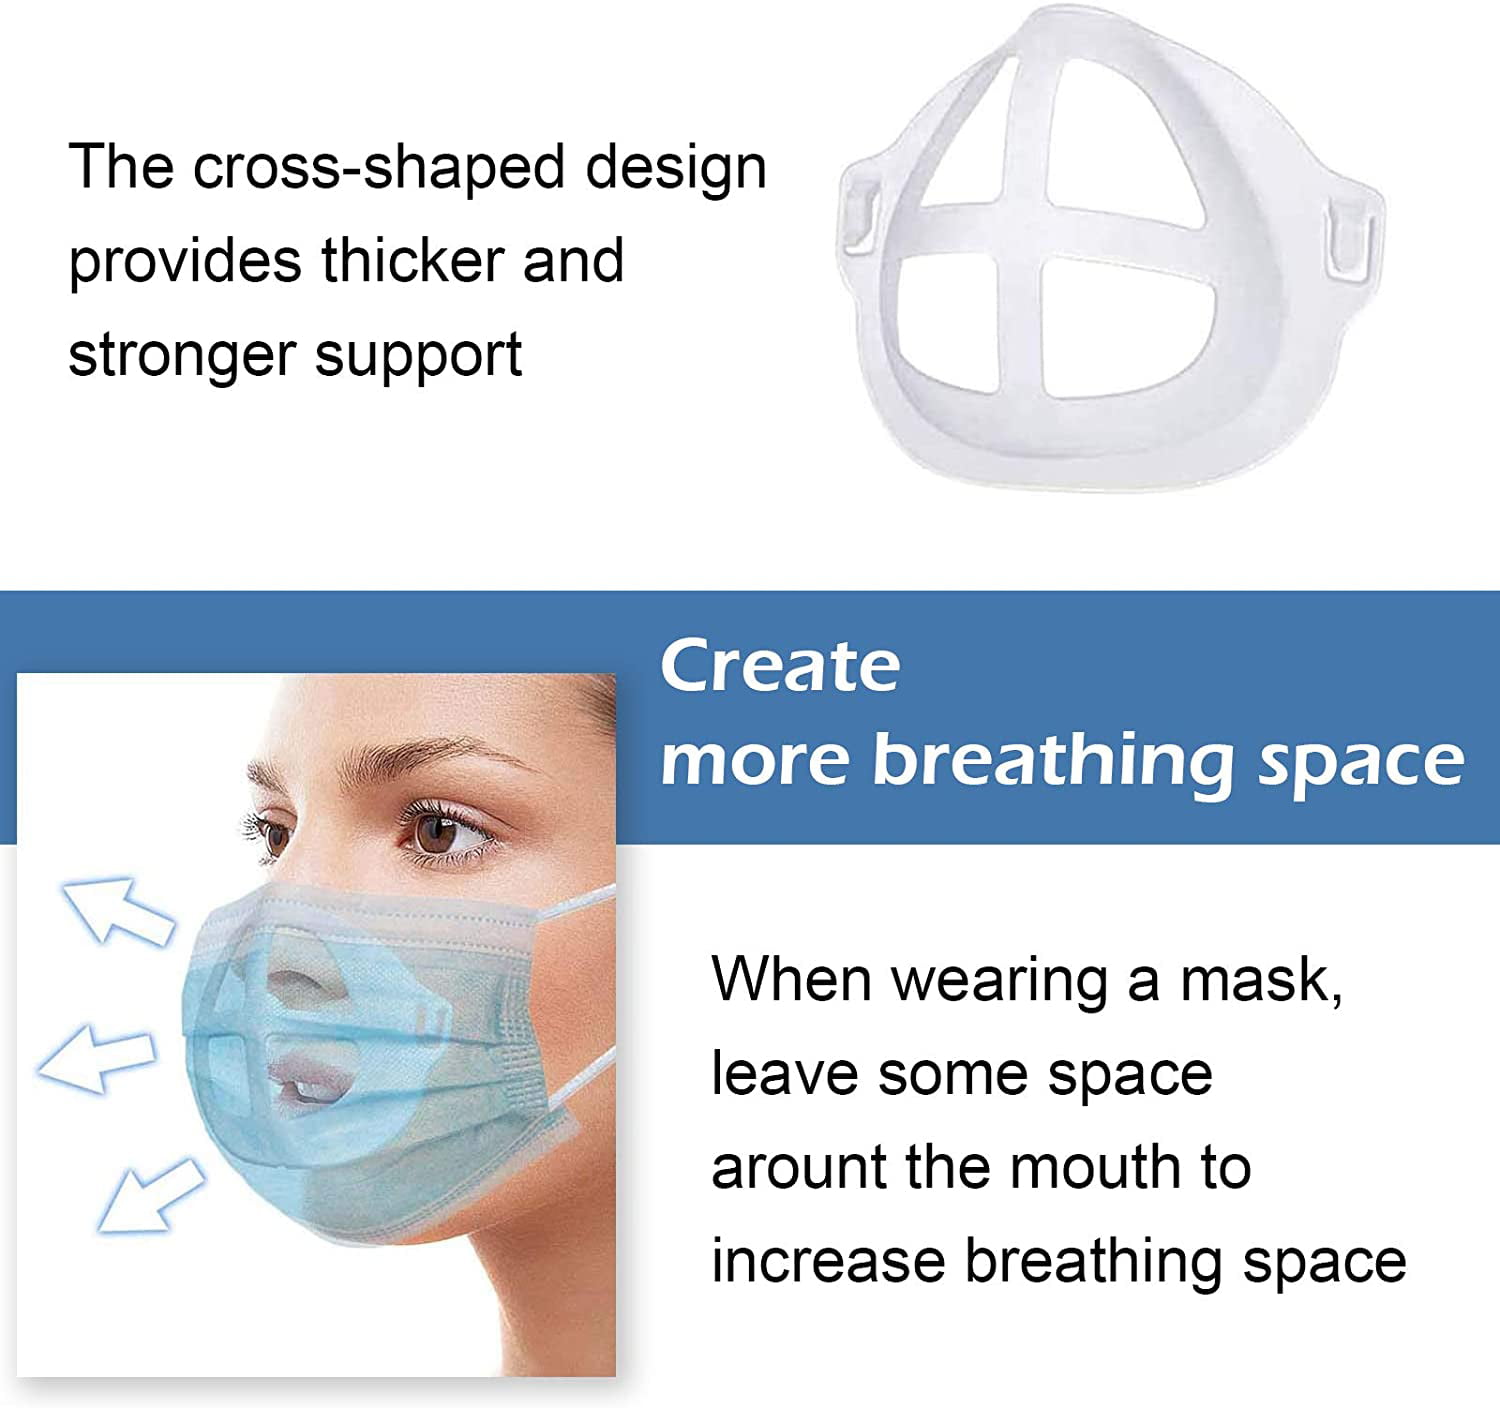 3D Face Inner Bracket for Non-Stick Lipstick Comfortable Breathing Inner Support Frame|Under Frame Lipstick Protector Keep Fabric off Mouth to Create More Breathing Space 25PCS/35PCS 